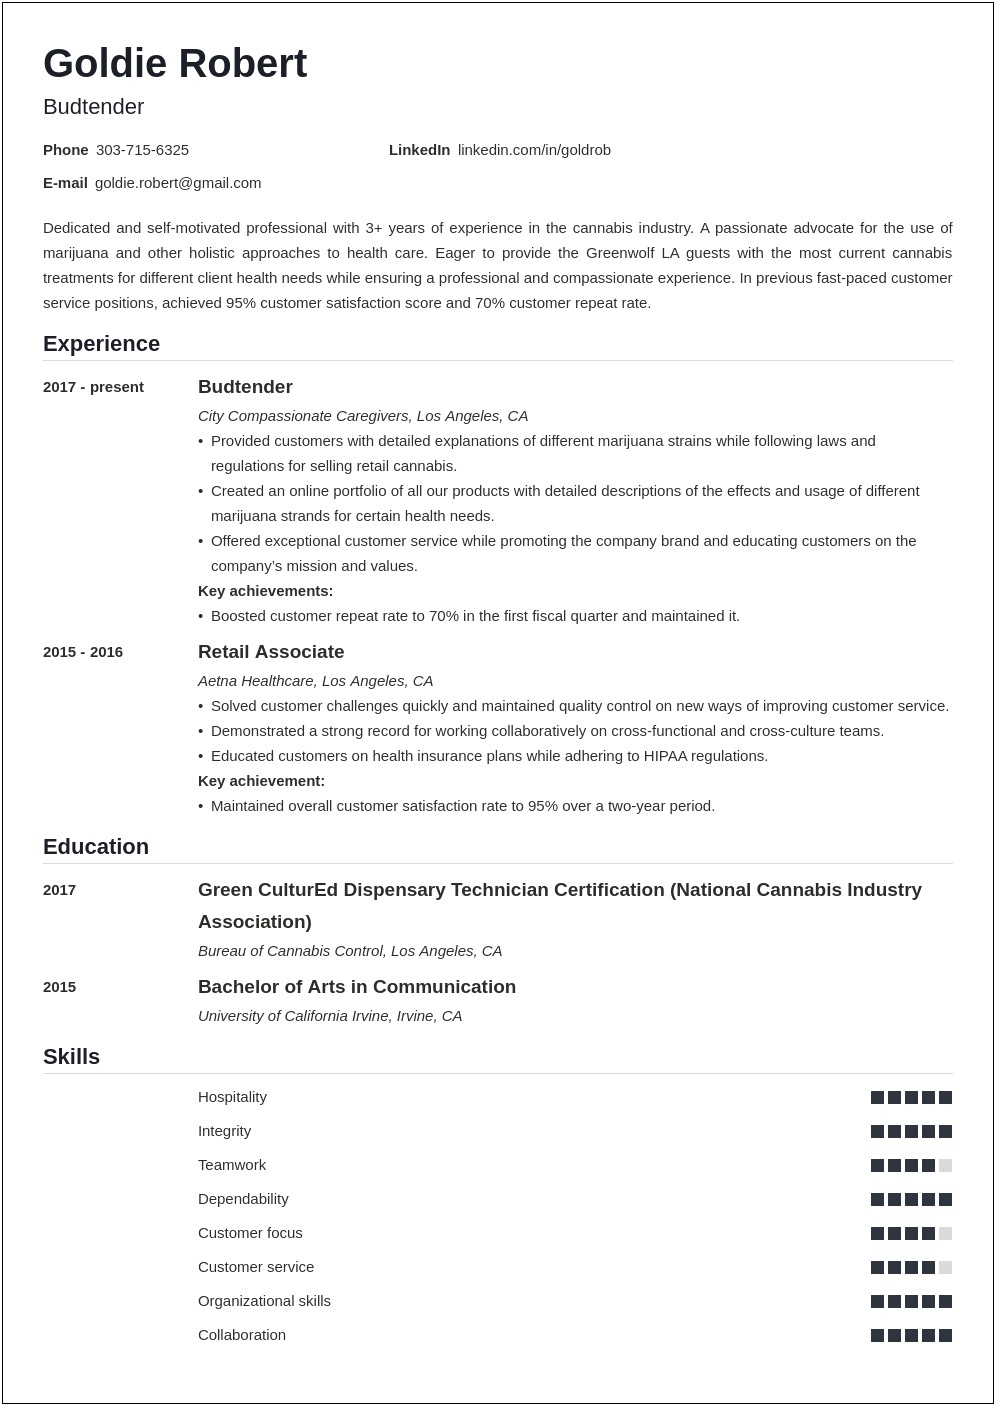 Sample Resume For Cannabis Industry